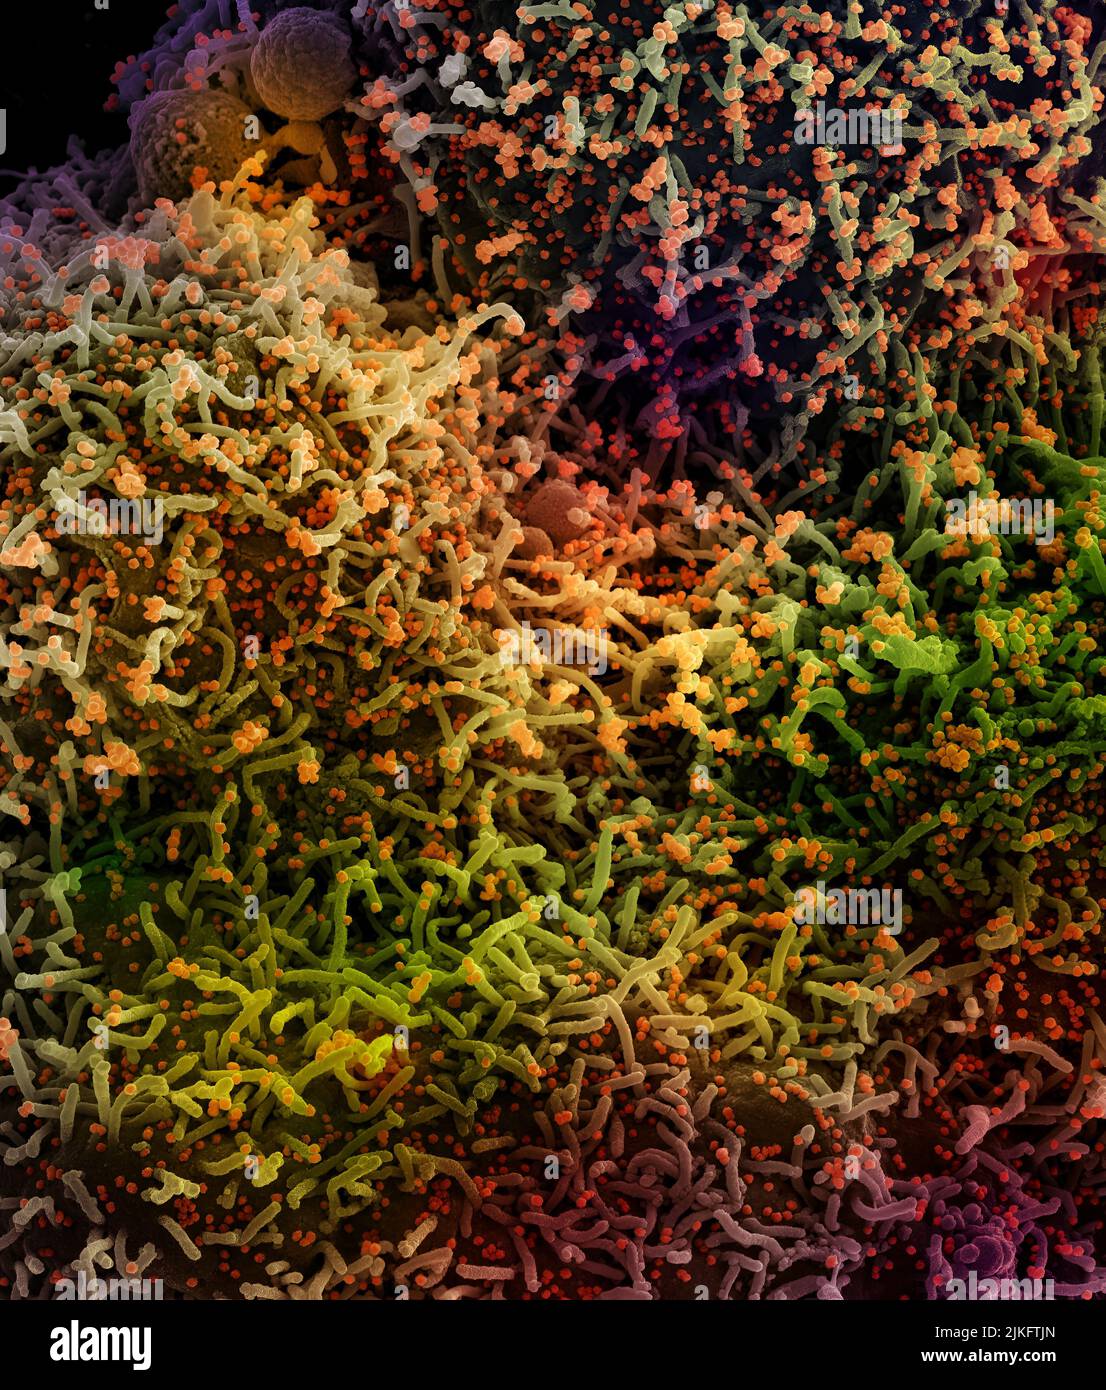 Scanning electron micrograph of a cell infected with a variant strain of SARS-CoV-2 virus particles (orange), isolated from a patient sample and colorized. Image requested from the NIAID Integrated Research Facility (IRF) in Fort Detrick, Maryland. Stock Photo